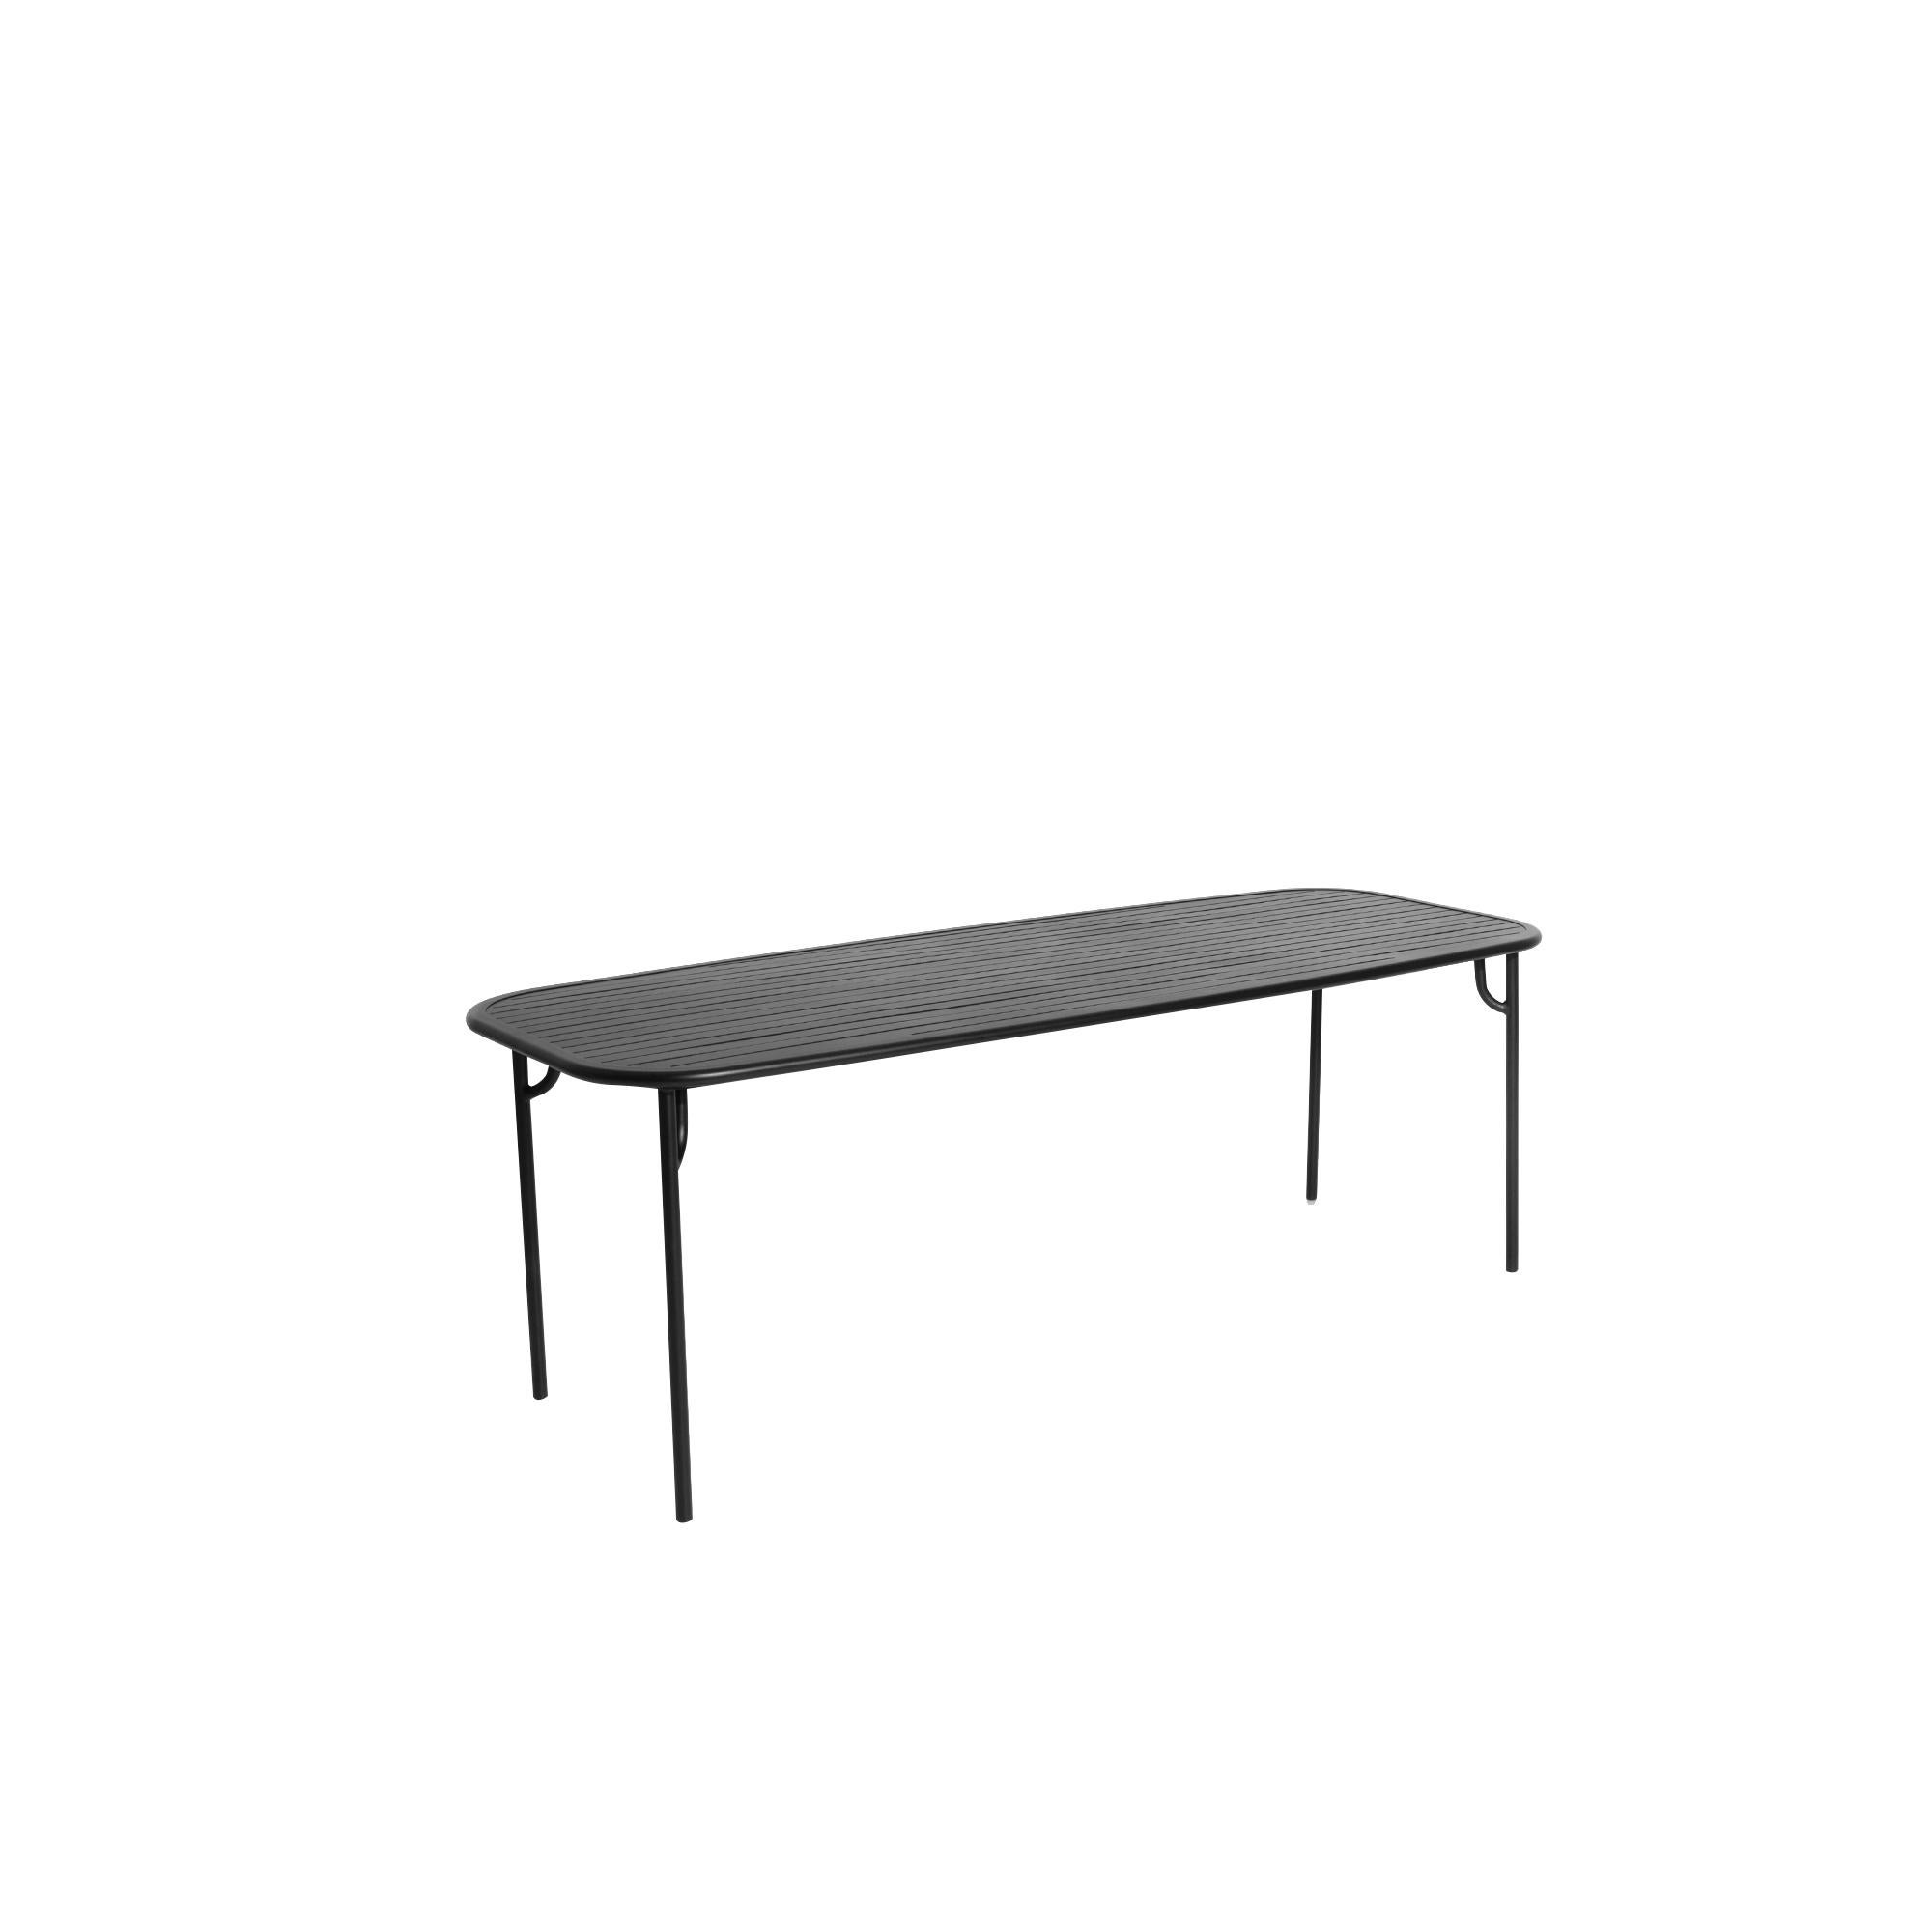 Petite Friture Week-End Large Rectangular Dining Table in Black Aluminium with Slats by Studio BrichetZiegler, 2017

The week-end collection is a full range of outdoor furniture, in aluminium grained epoxy paint, matt finish, that includes 18